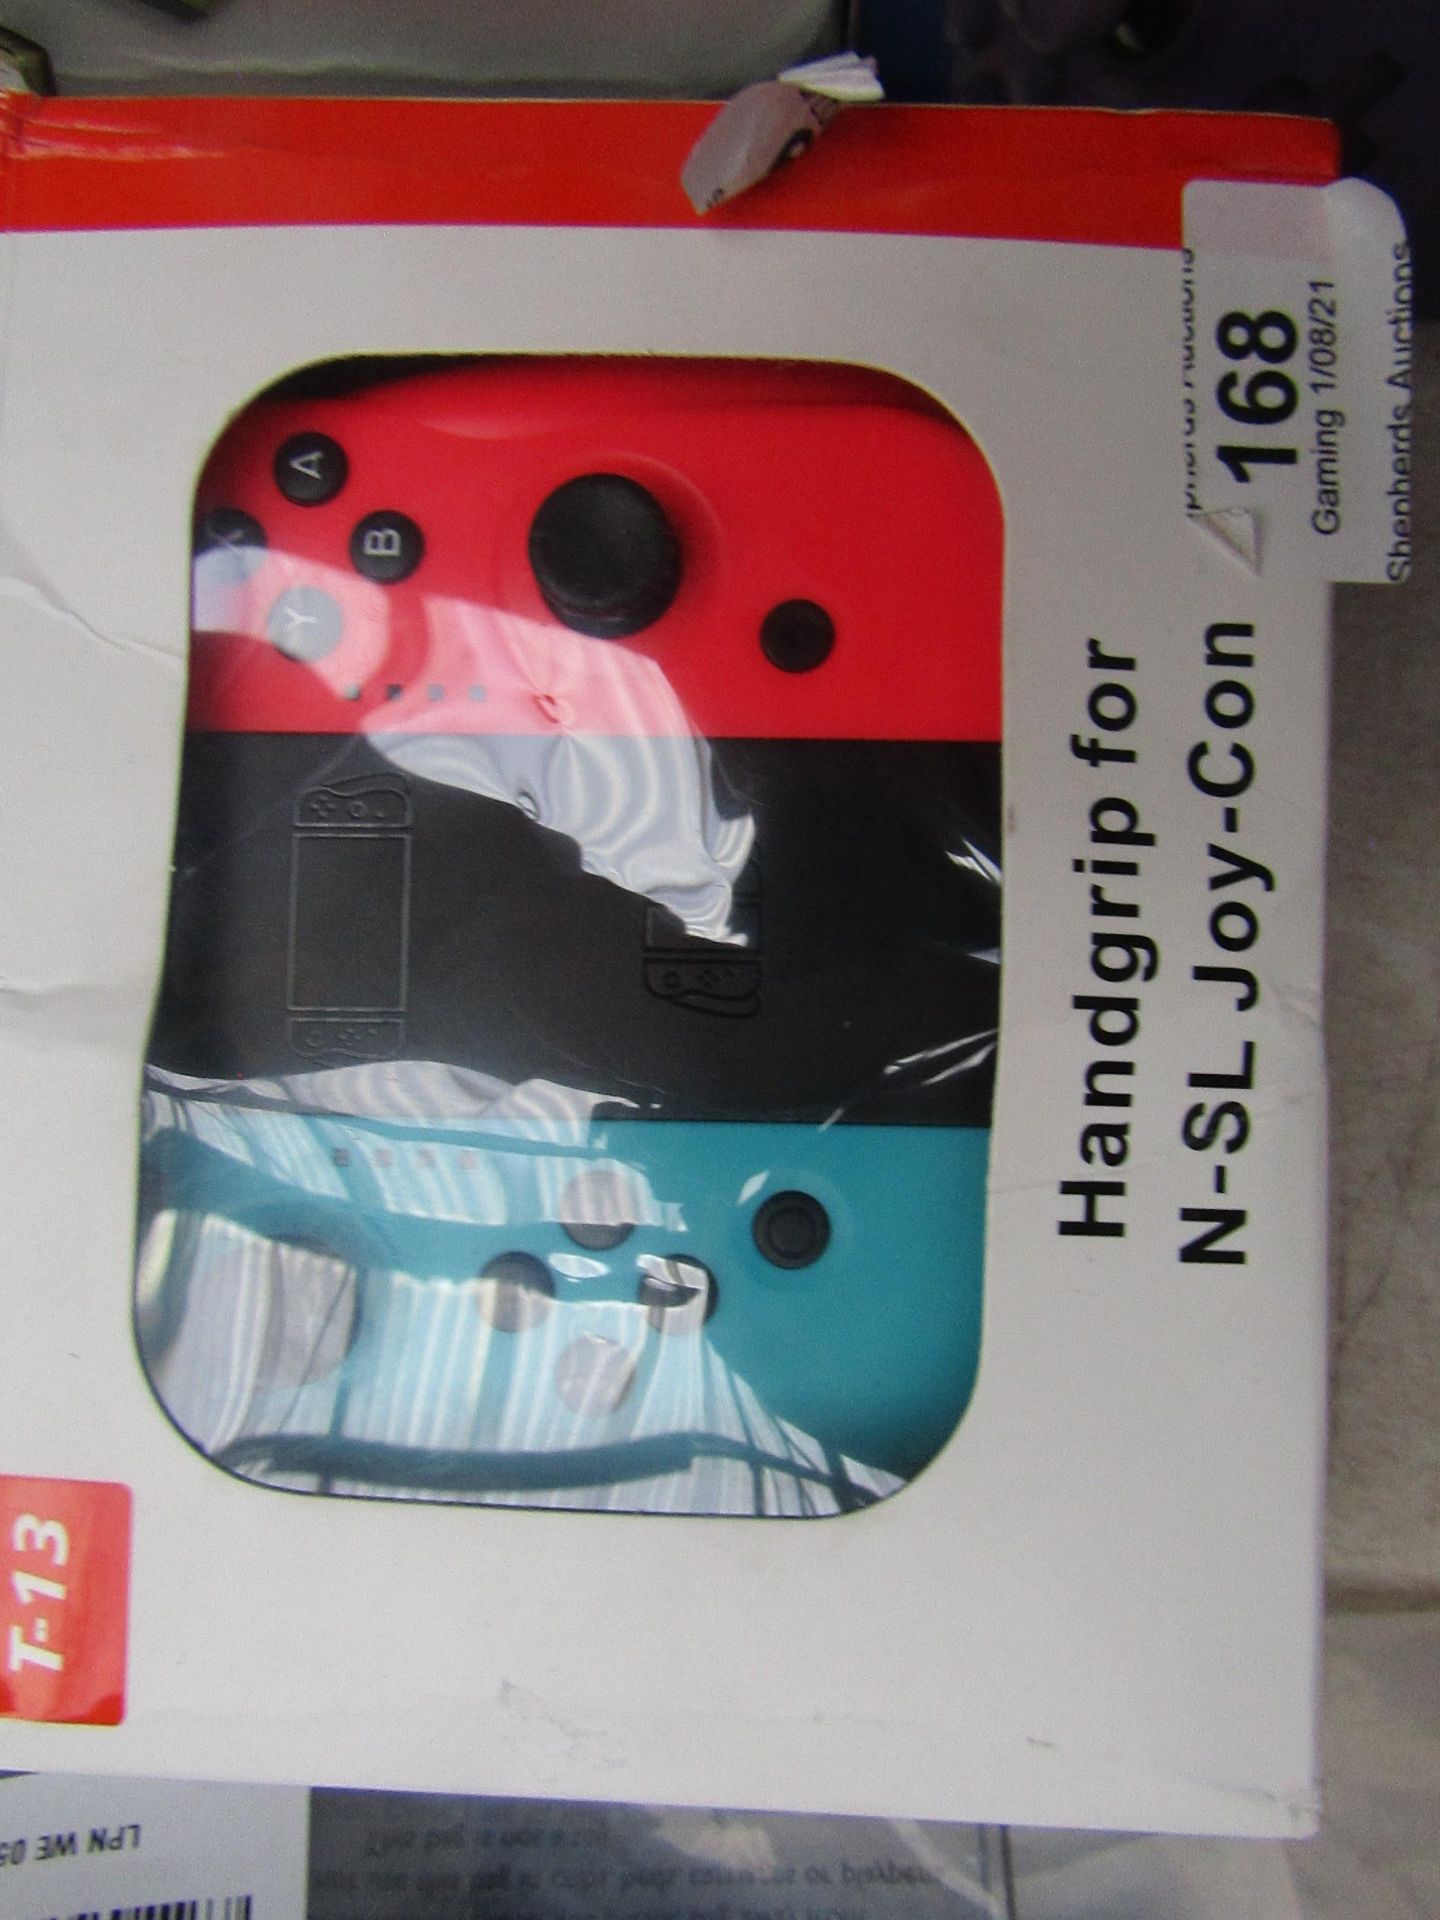 Handi grip controller frame and both side joy cons for a Nintendo switch, unchecked and boxed